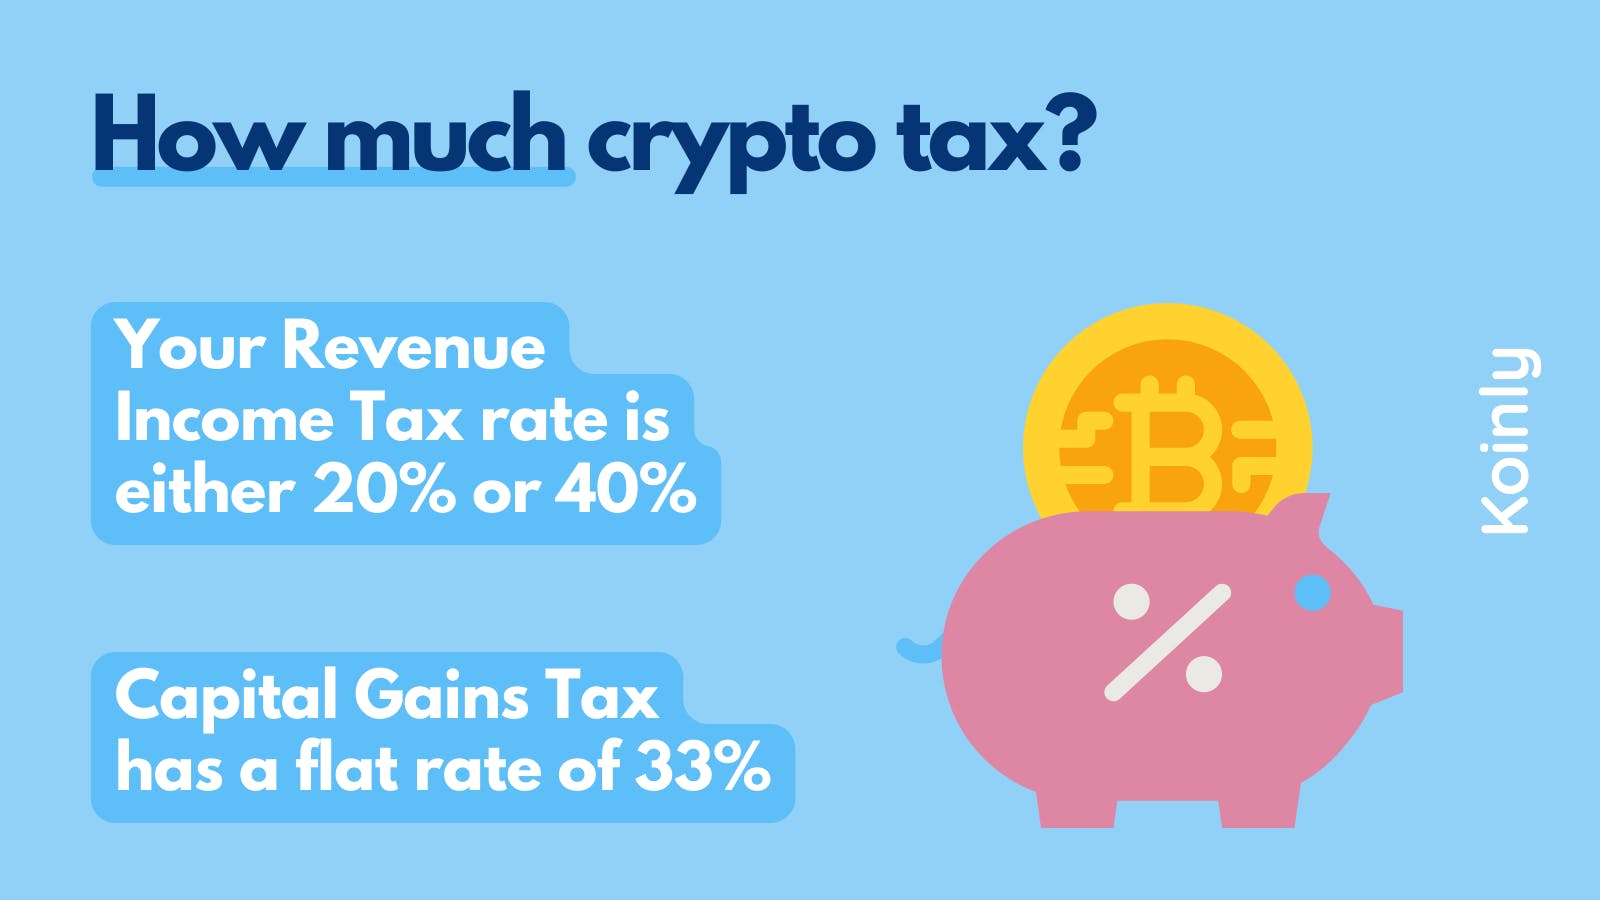 How much crypto tax?